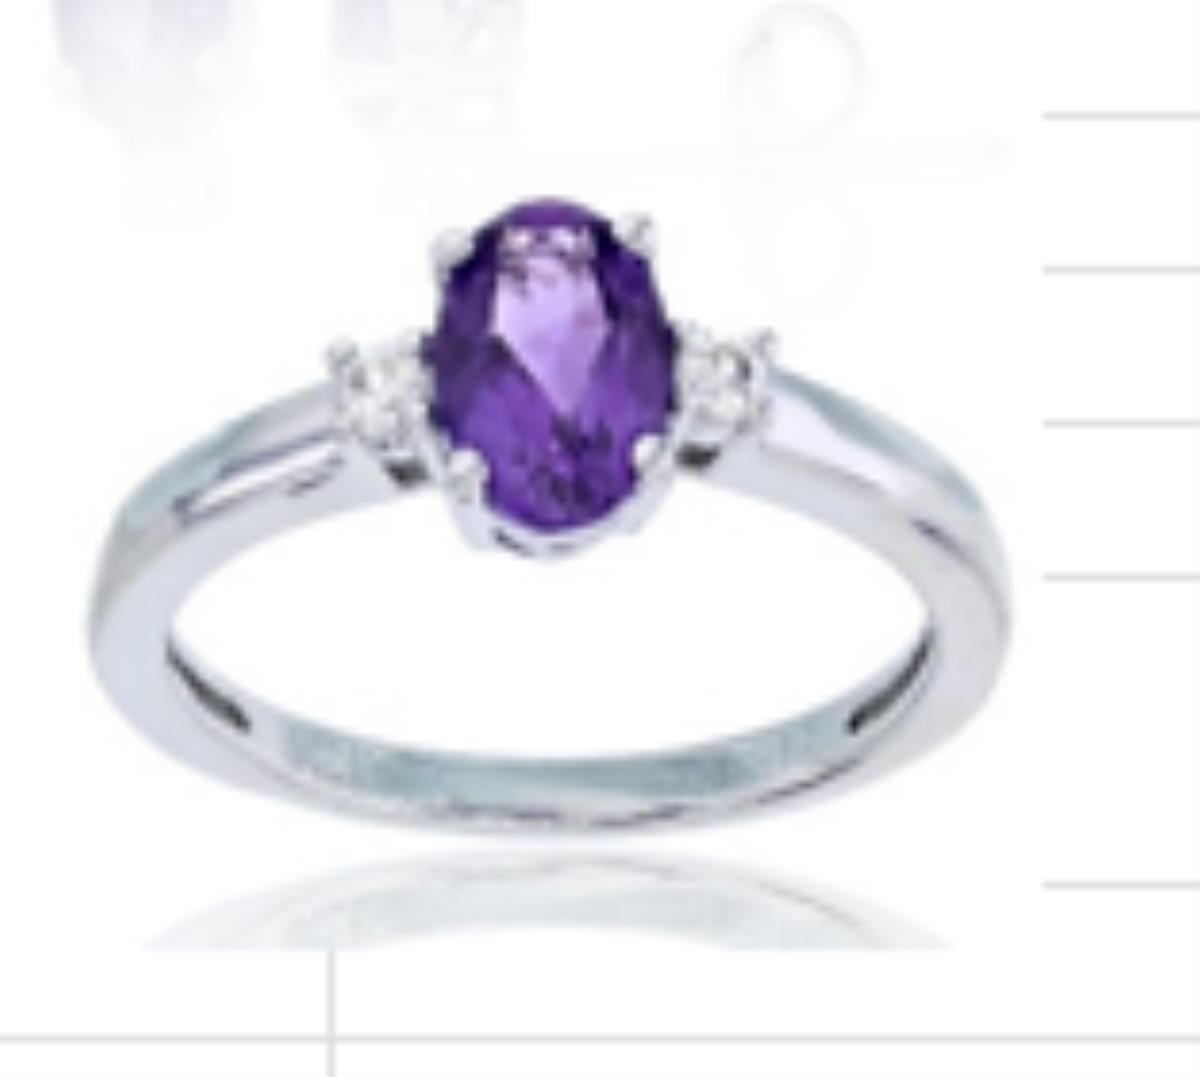 10K Gold White & 0.01 CTTW Diamond and OV Ct. Amethyst Ring